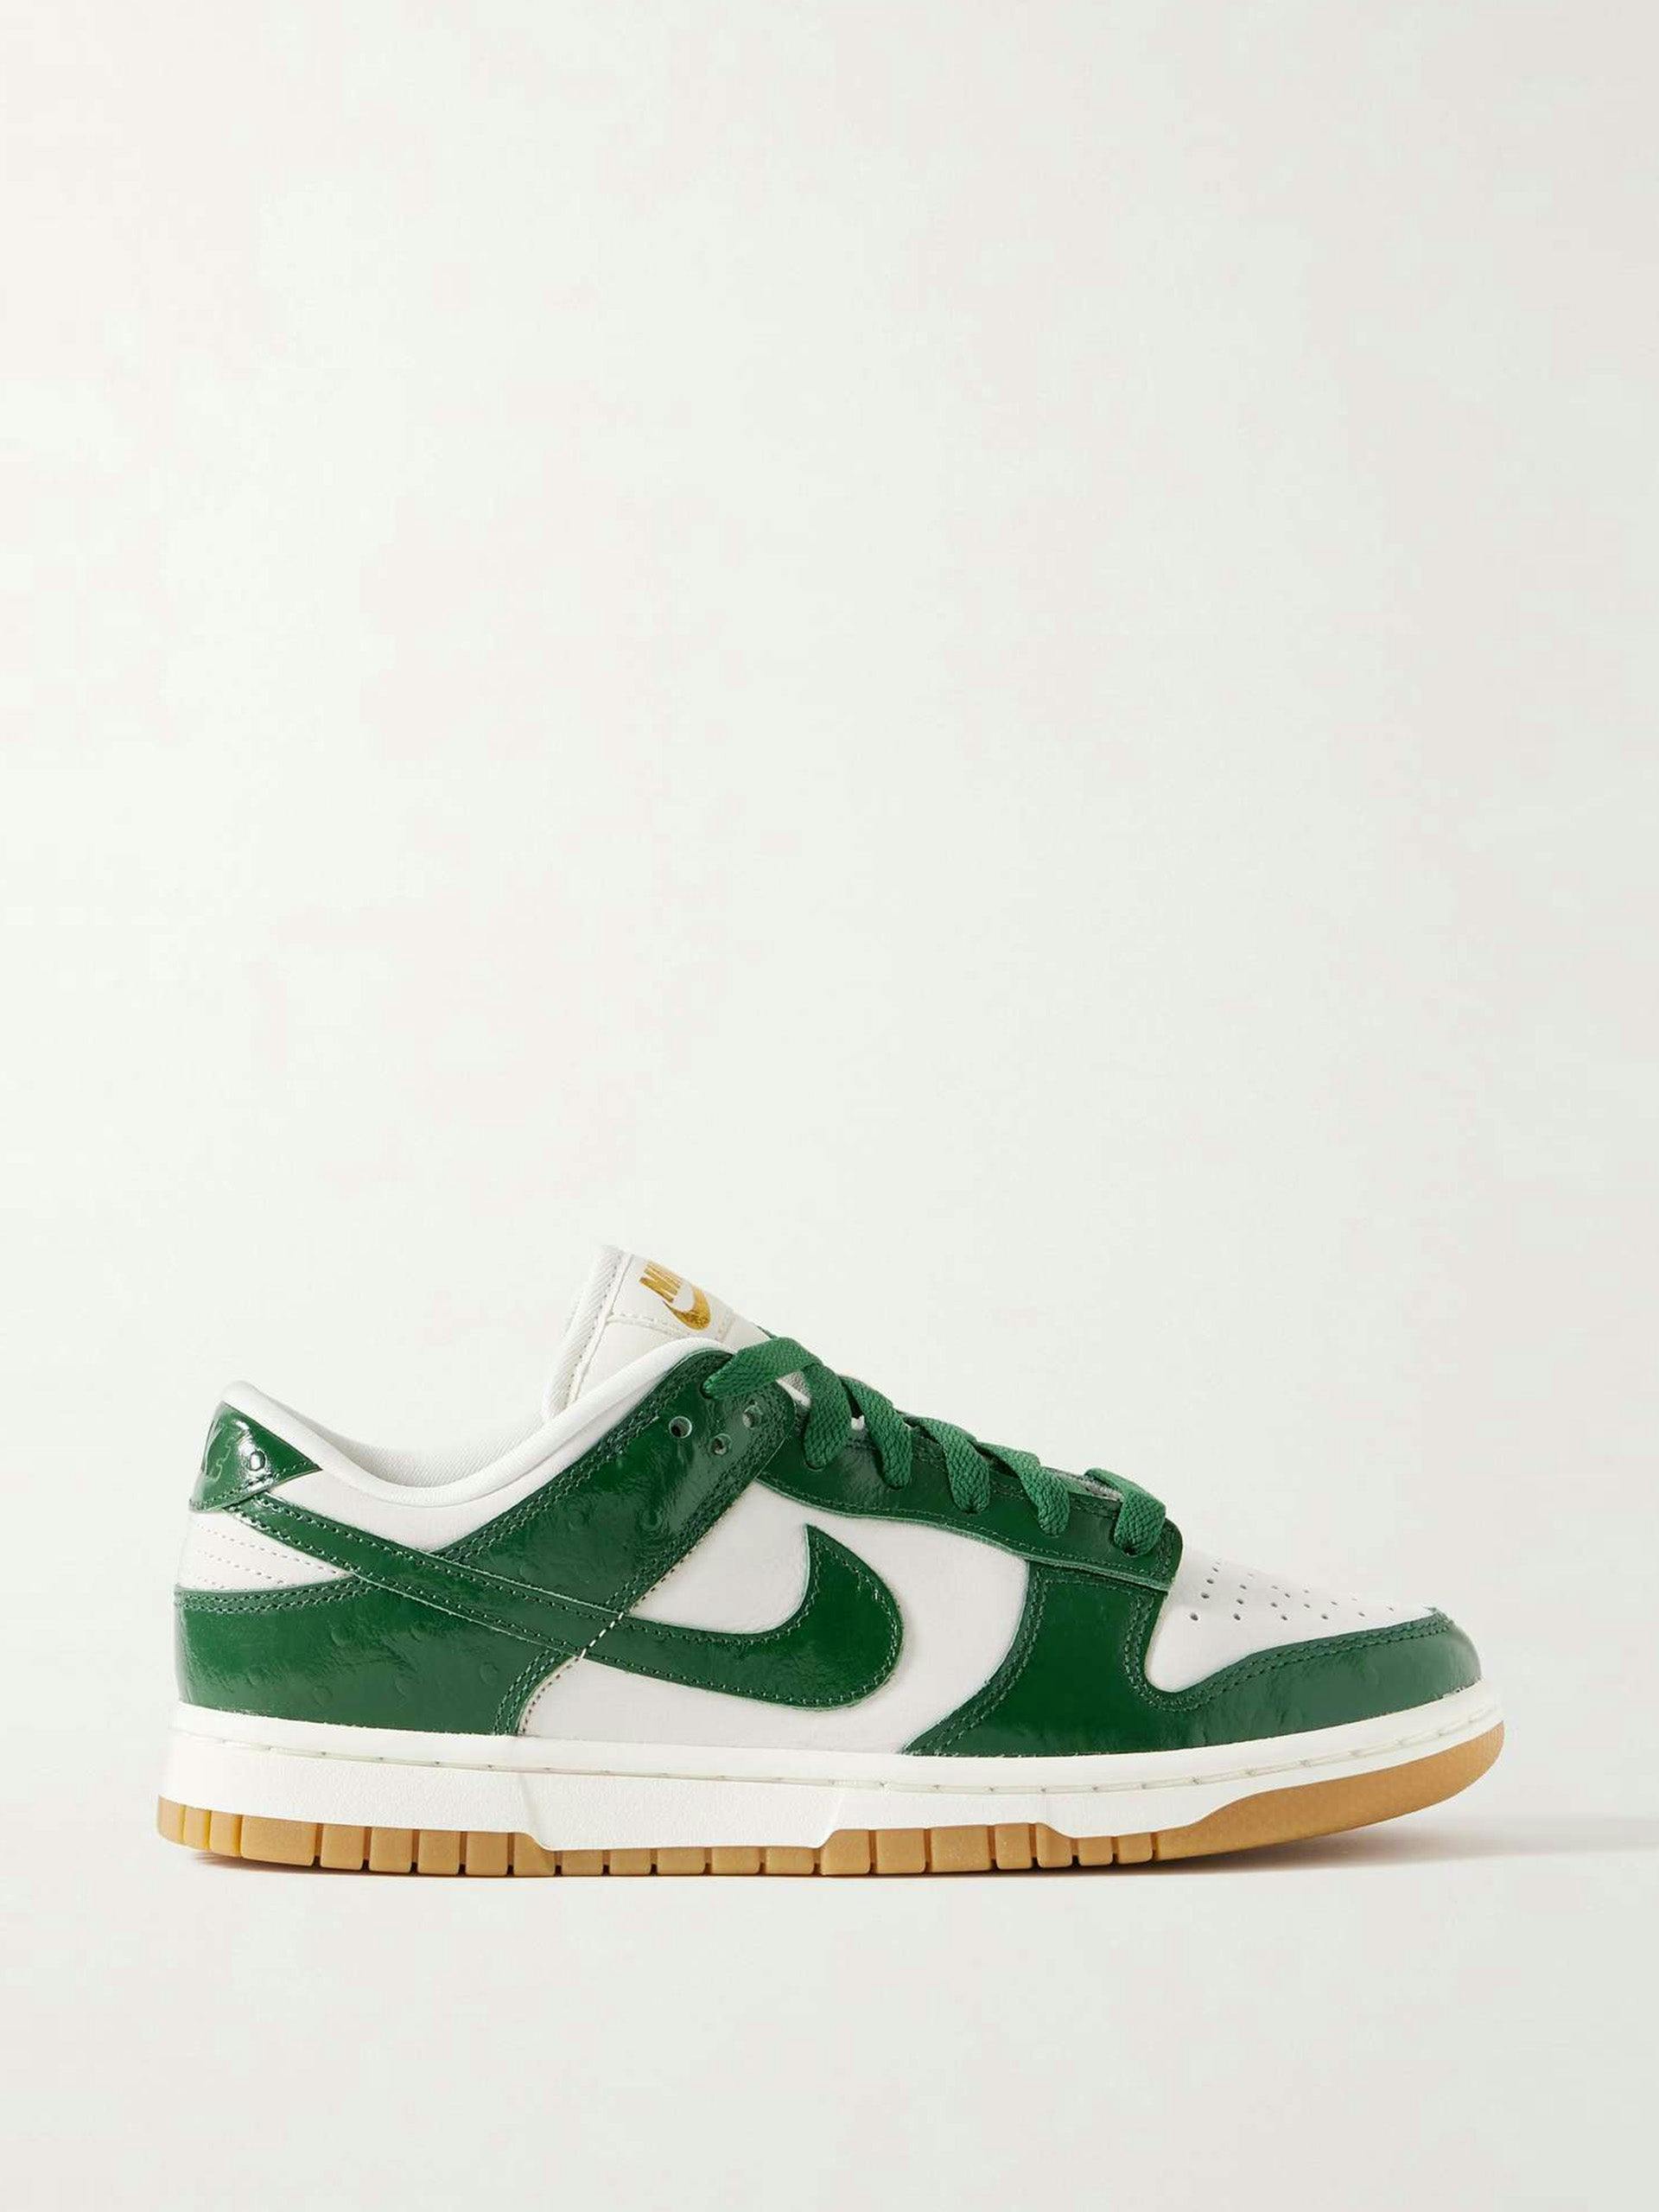 Dunk Low LX NBHD textured and smooth leather sneakers